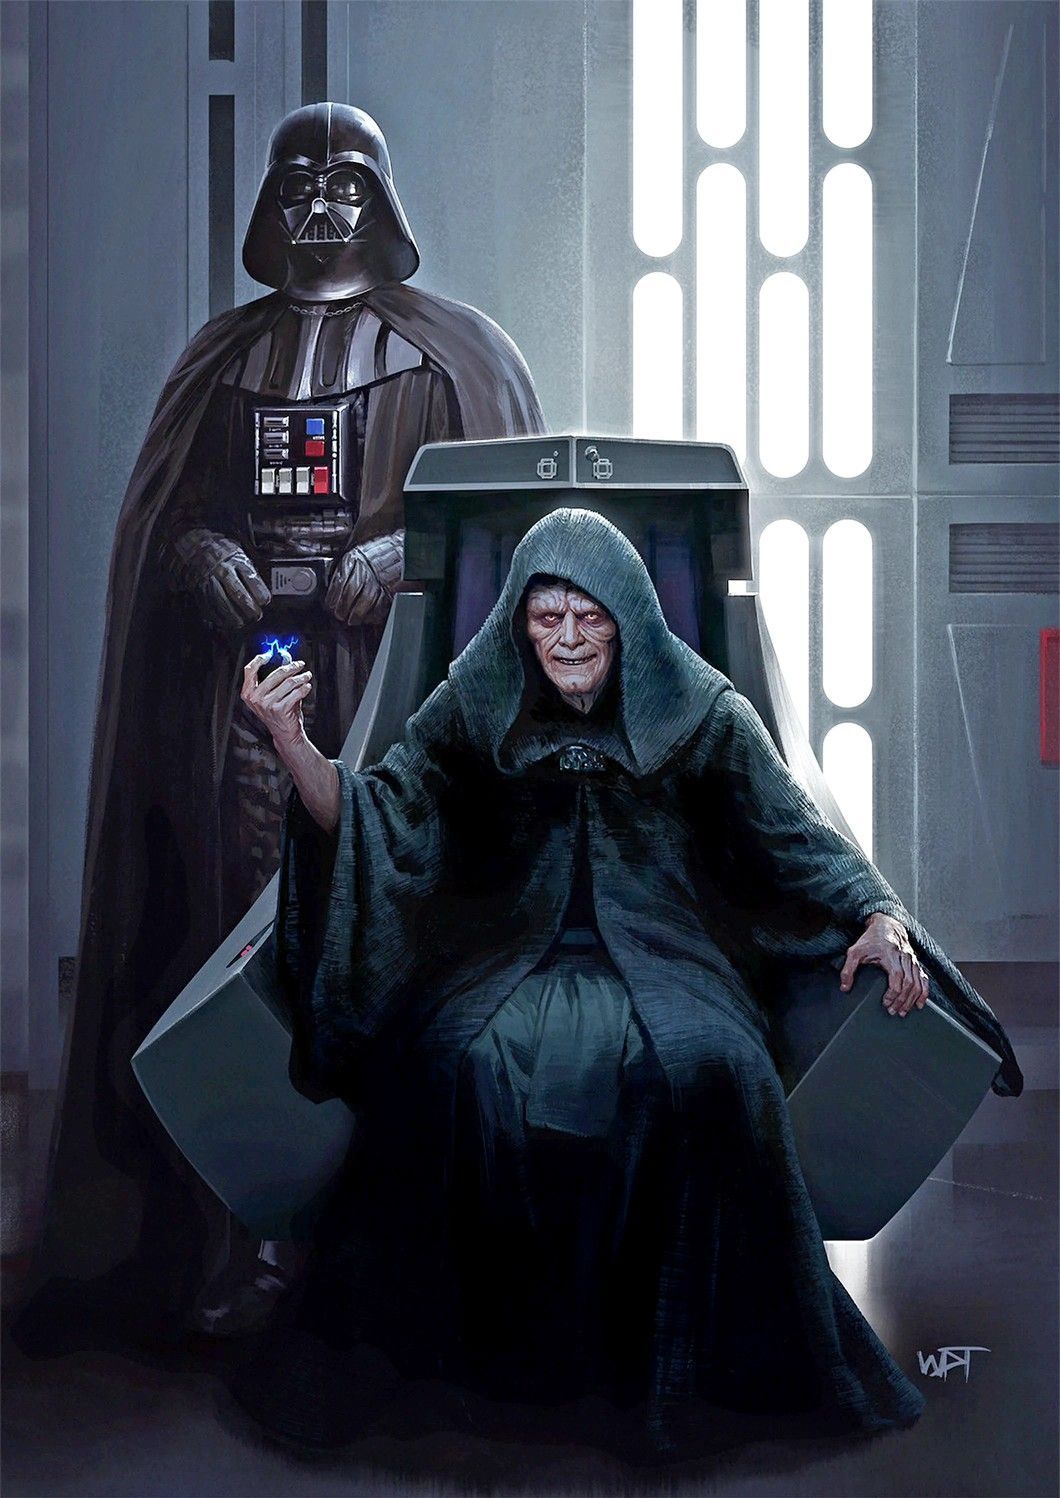 Lord Vader and Lord Palpatine. Star wars picture, Star wars image, Star wars empire